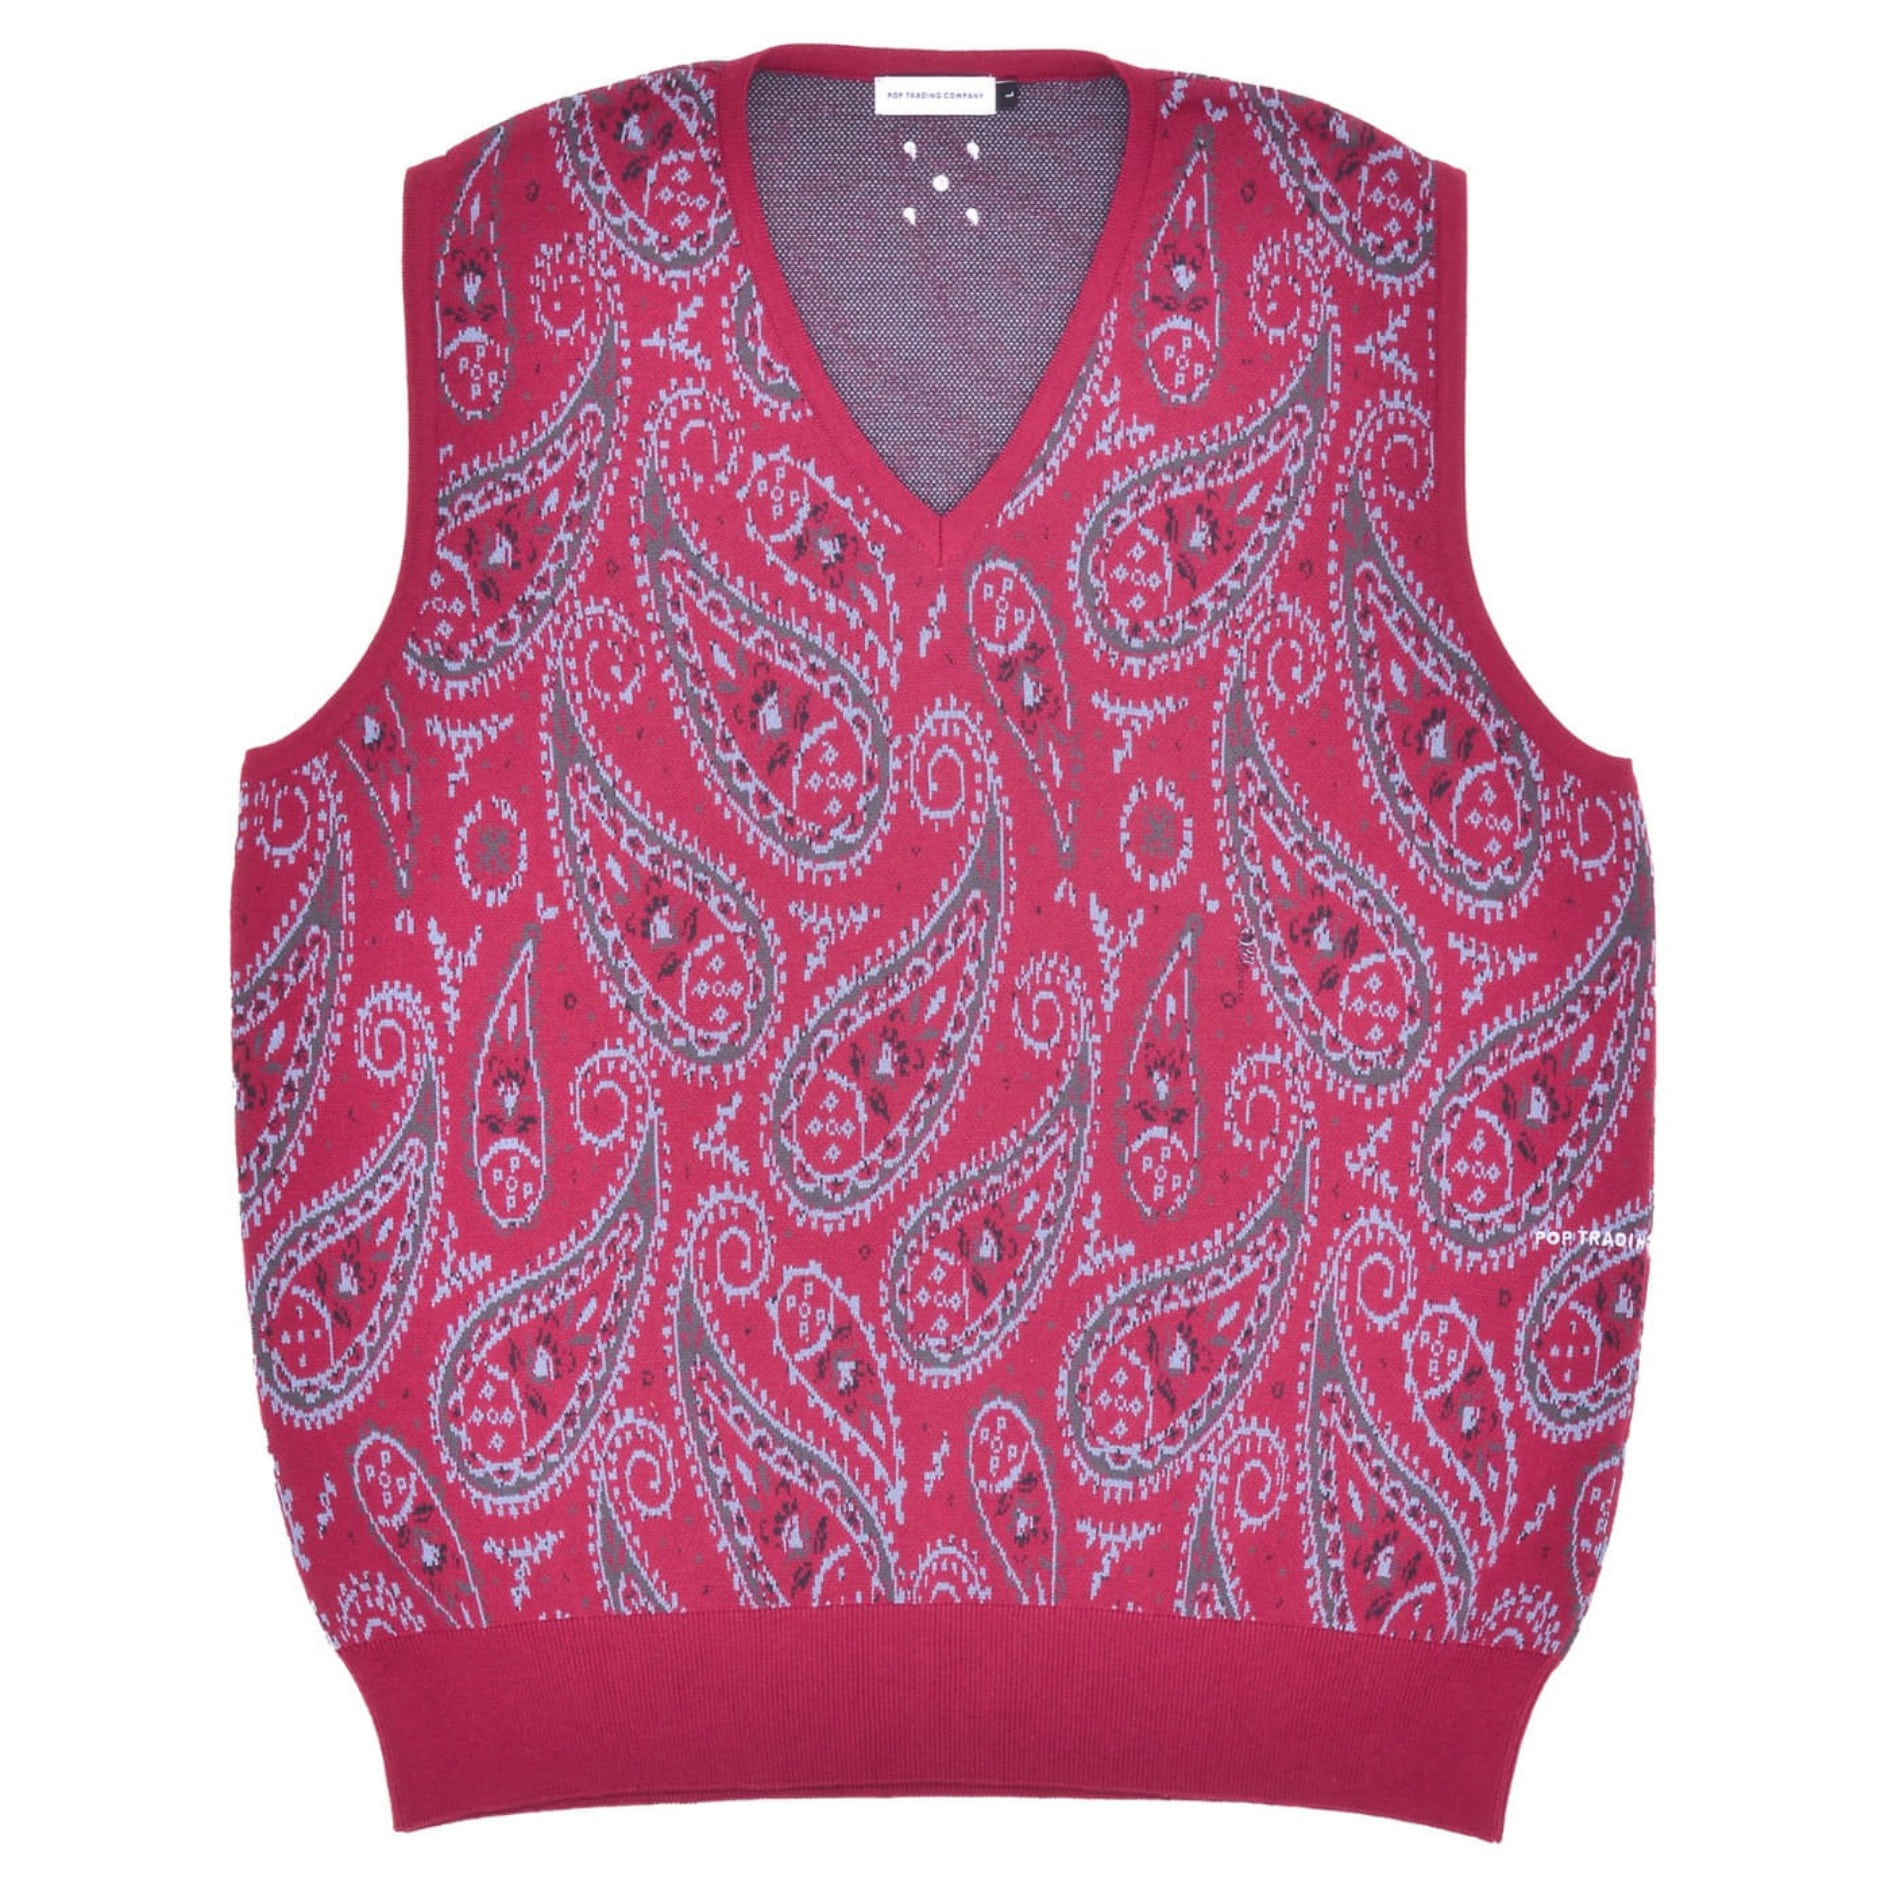 POP TRADING COMPANY KNITTED SPENCER RASPBERRY